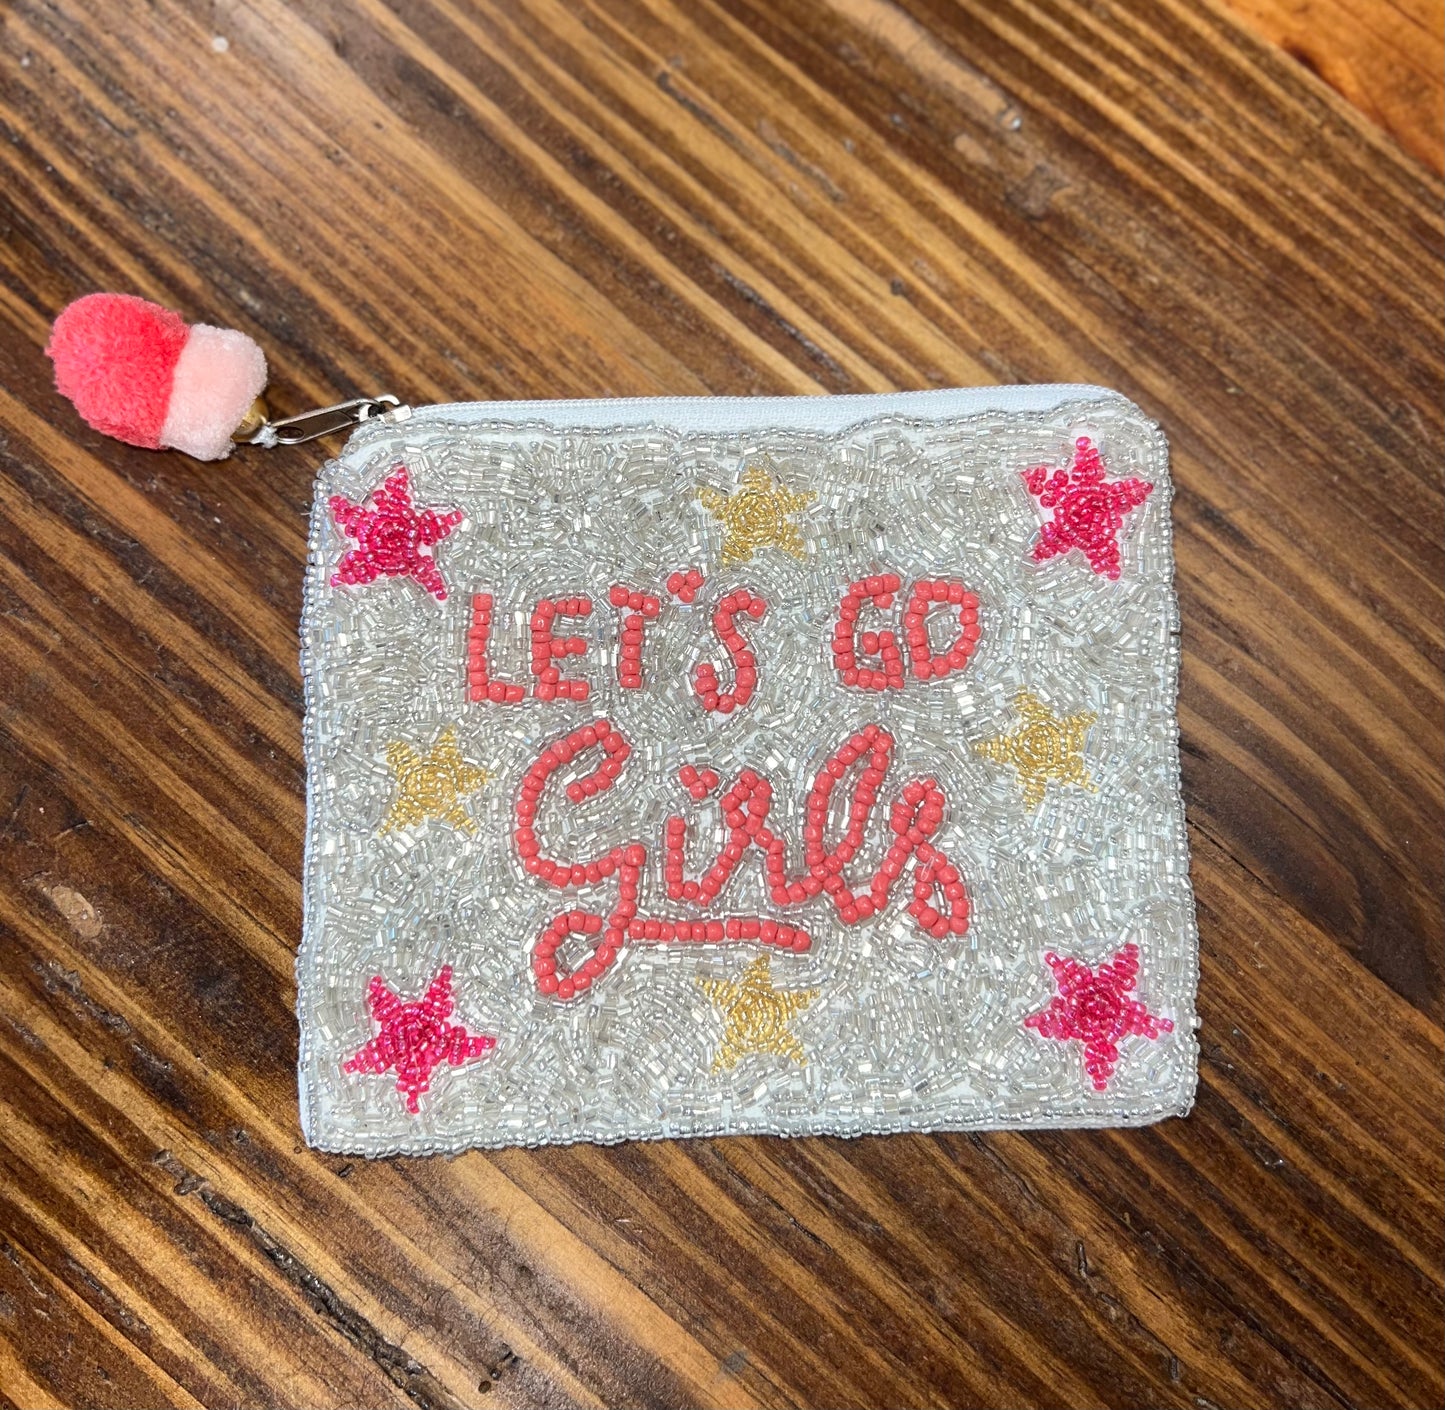 Lets Go Girls Beaded Pouch